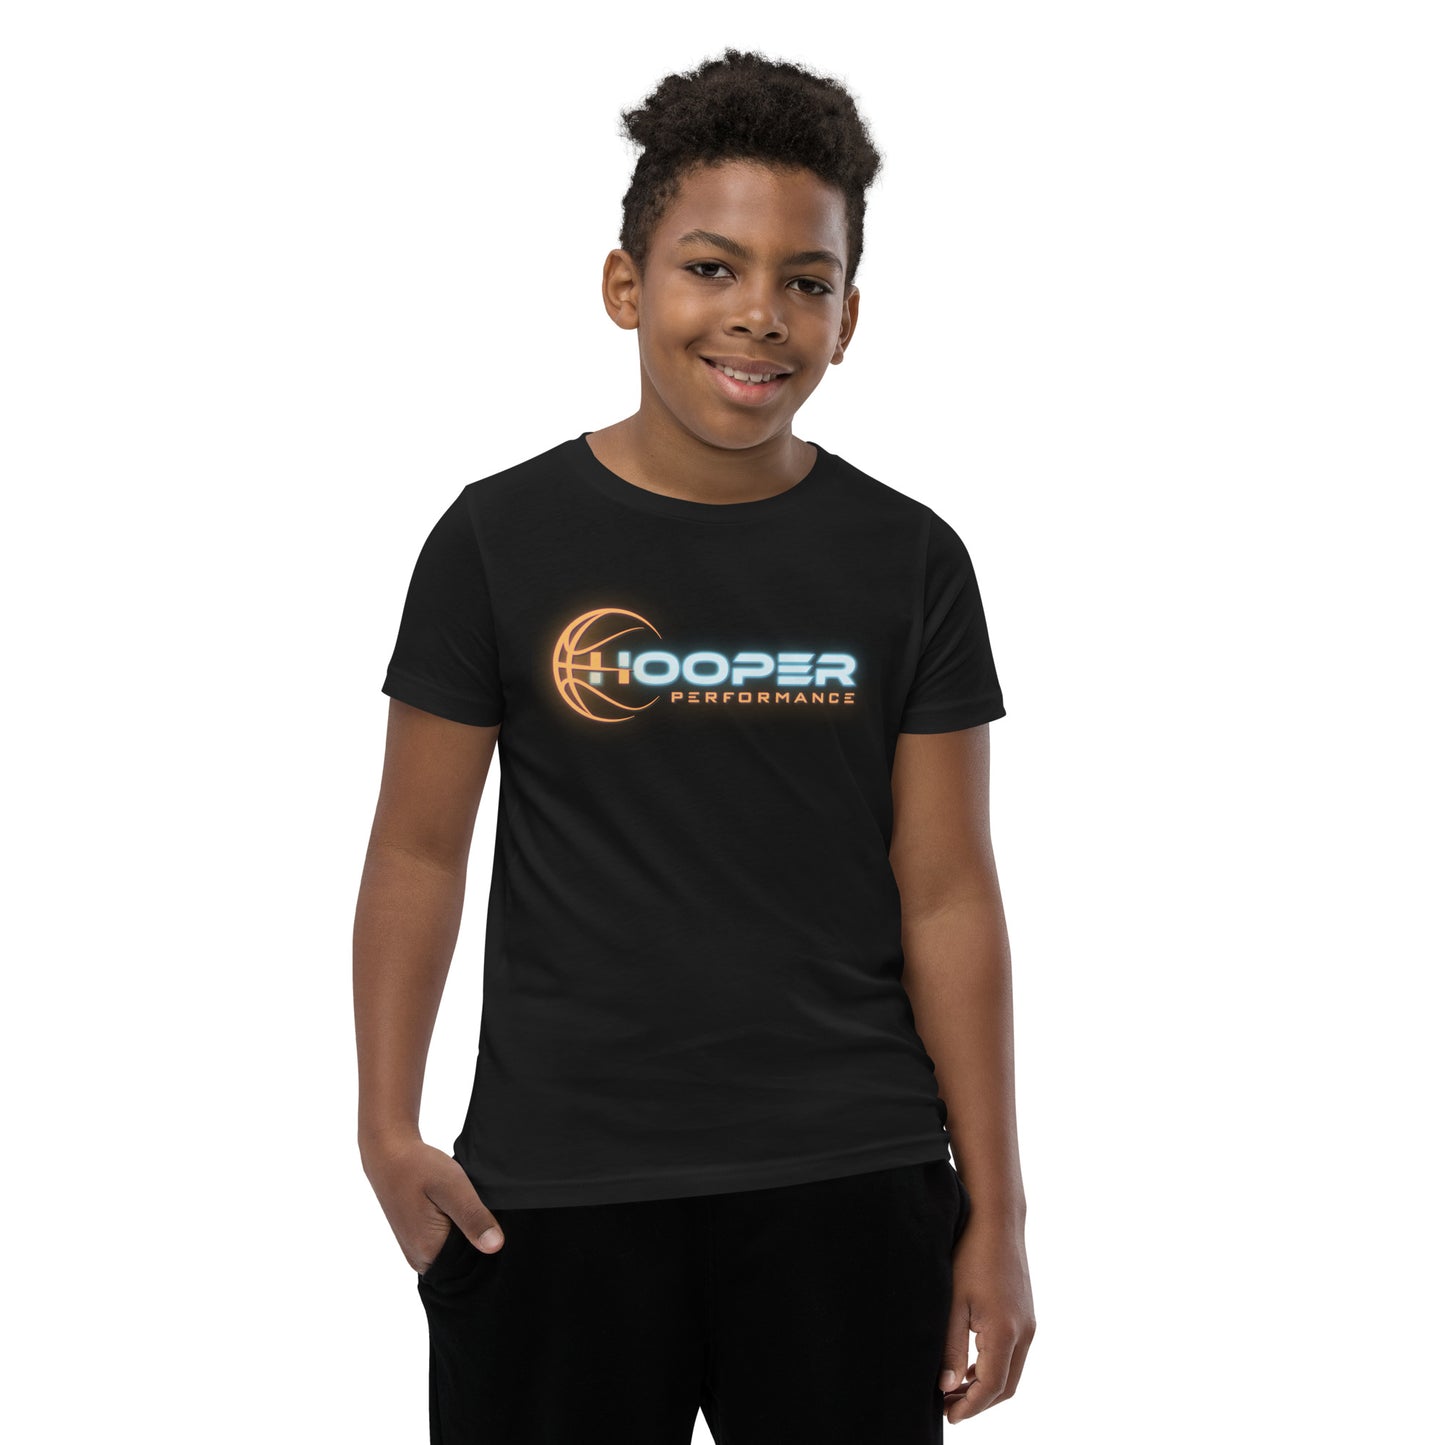 Hooper Performance Orange Color Youth Short Sleeve T-Shirt-Soft and Comfy for kids